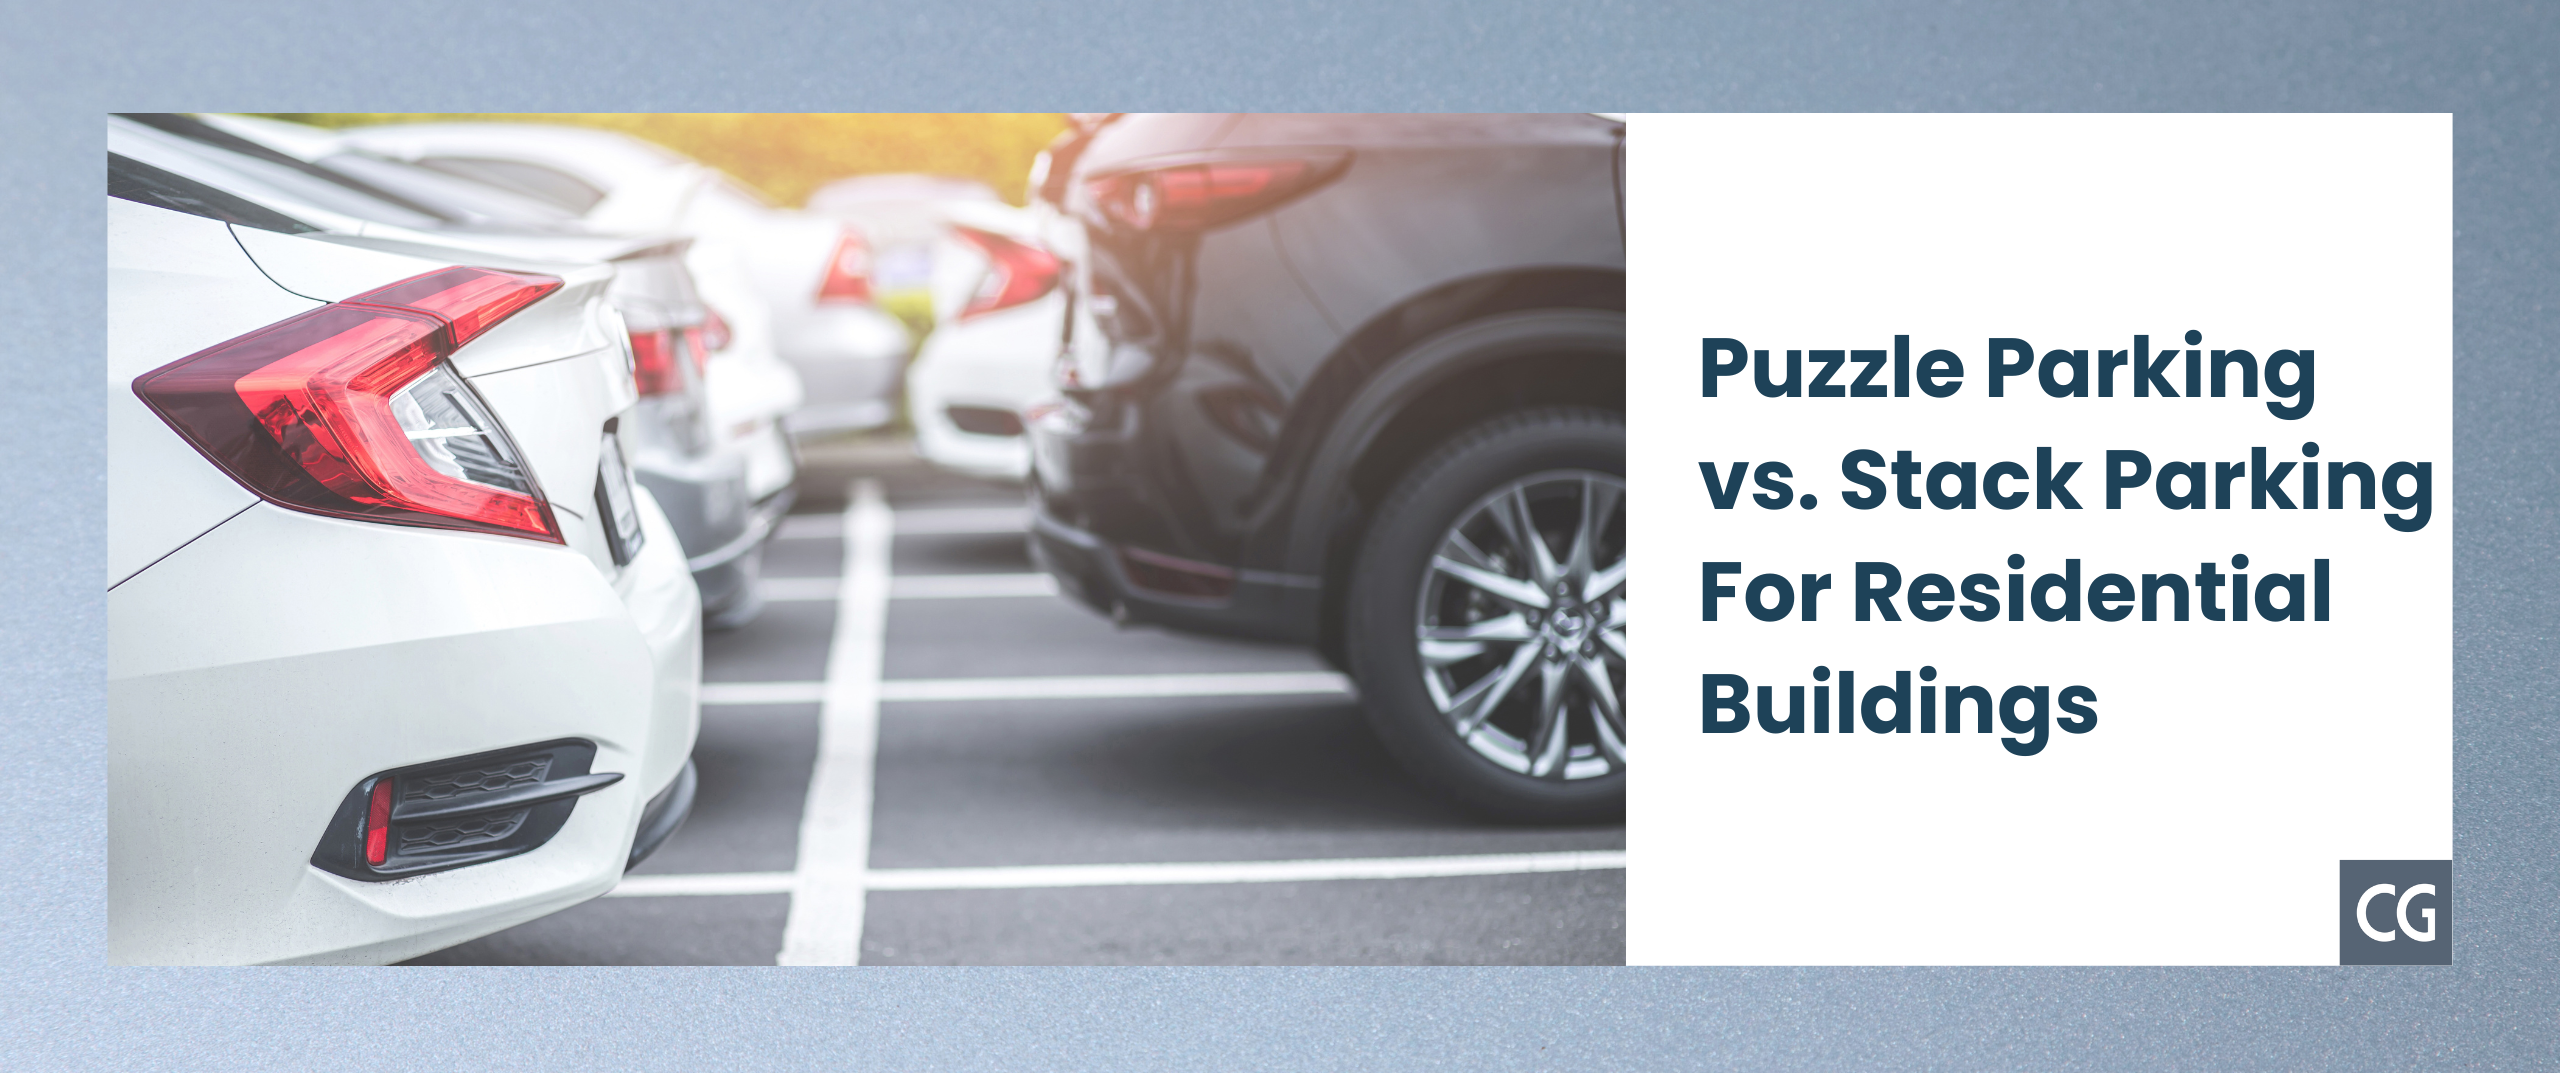 Puzzle Parking vs. Stack Parking For Residential Buildings